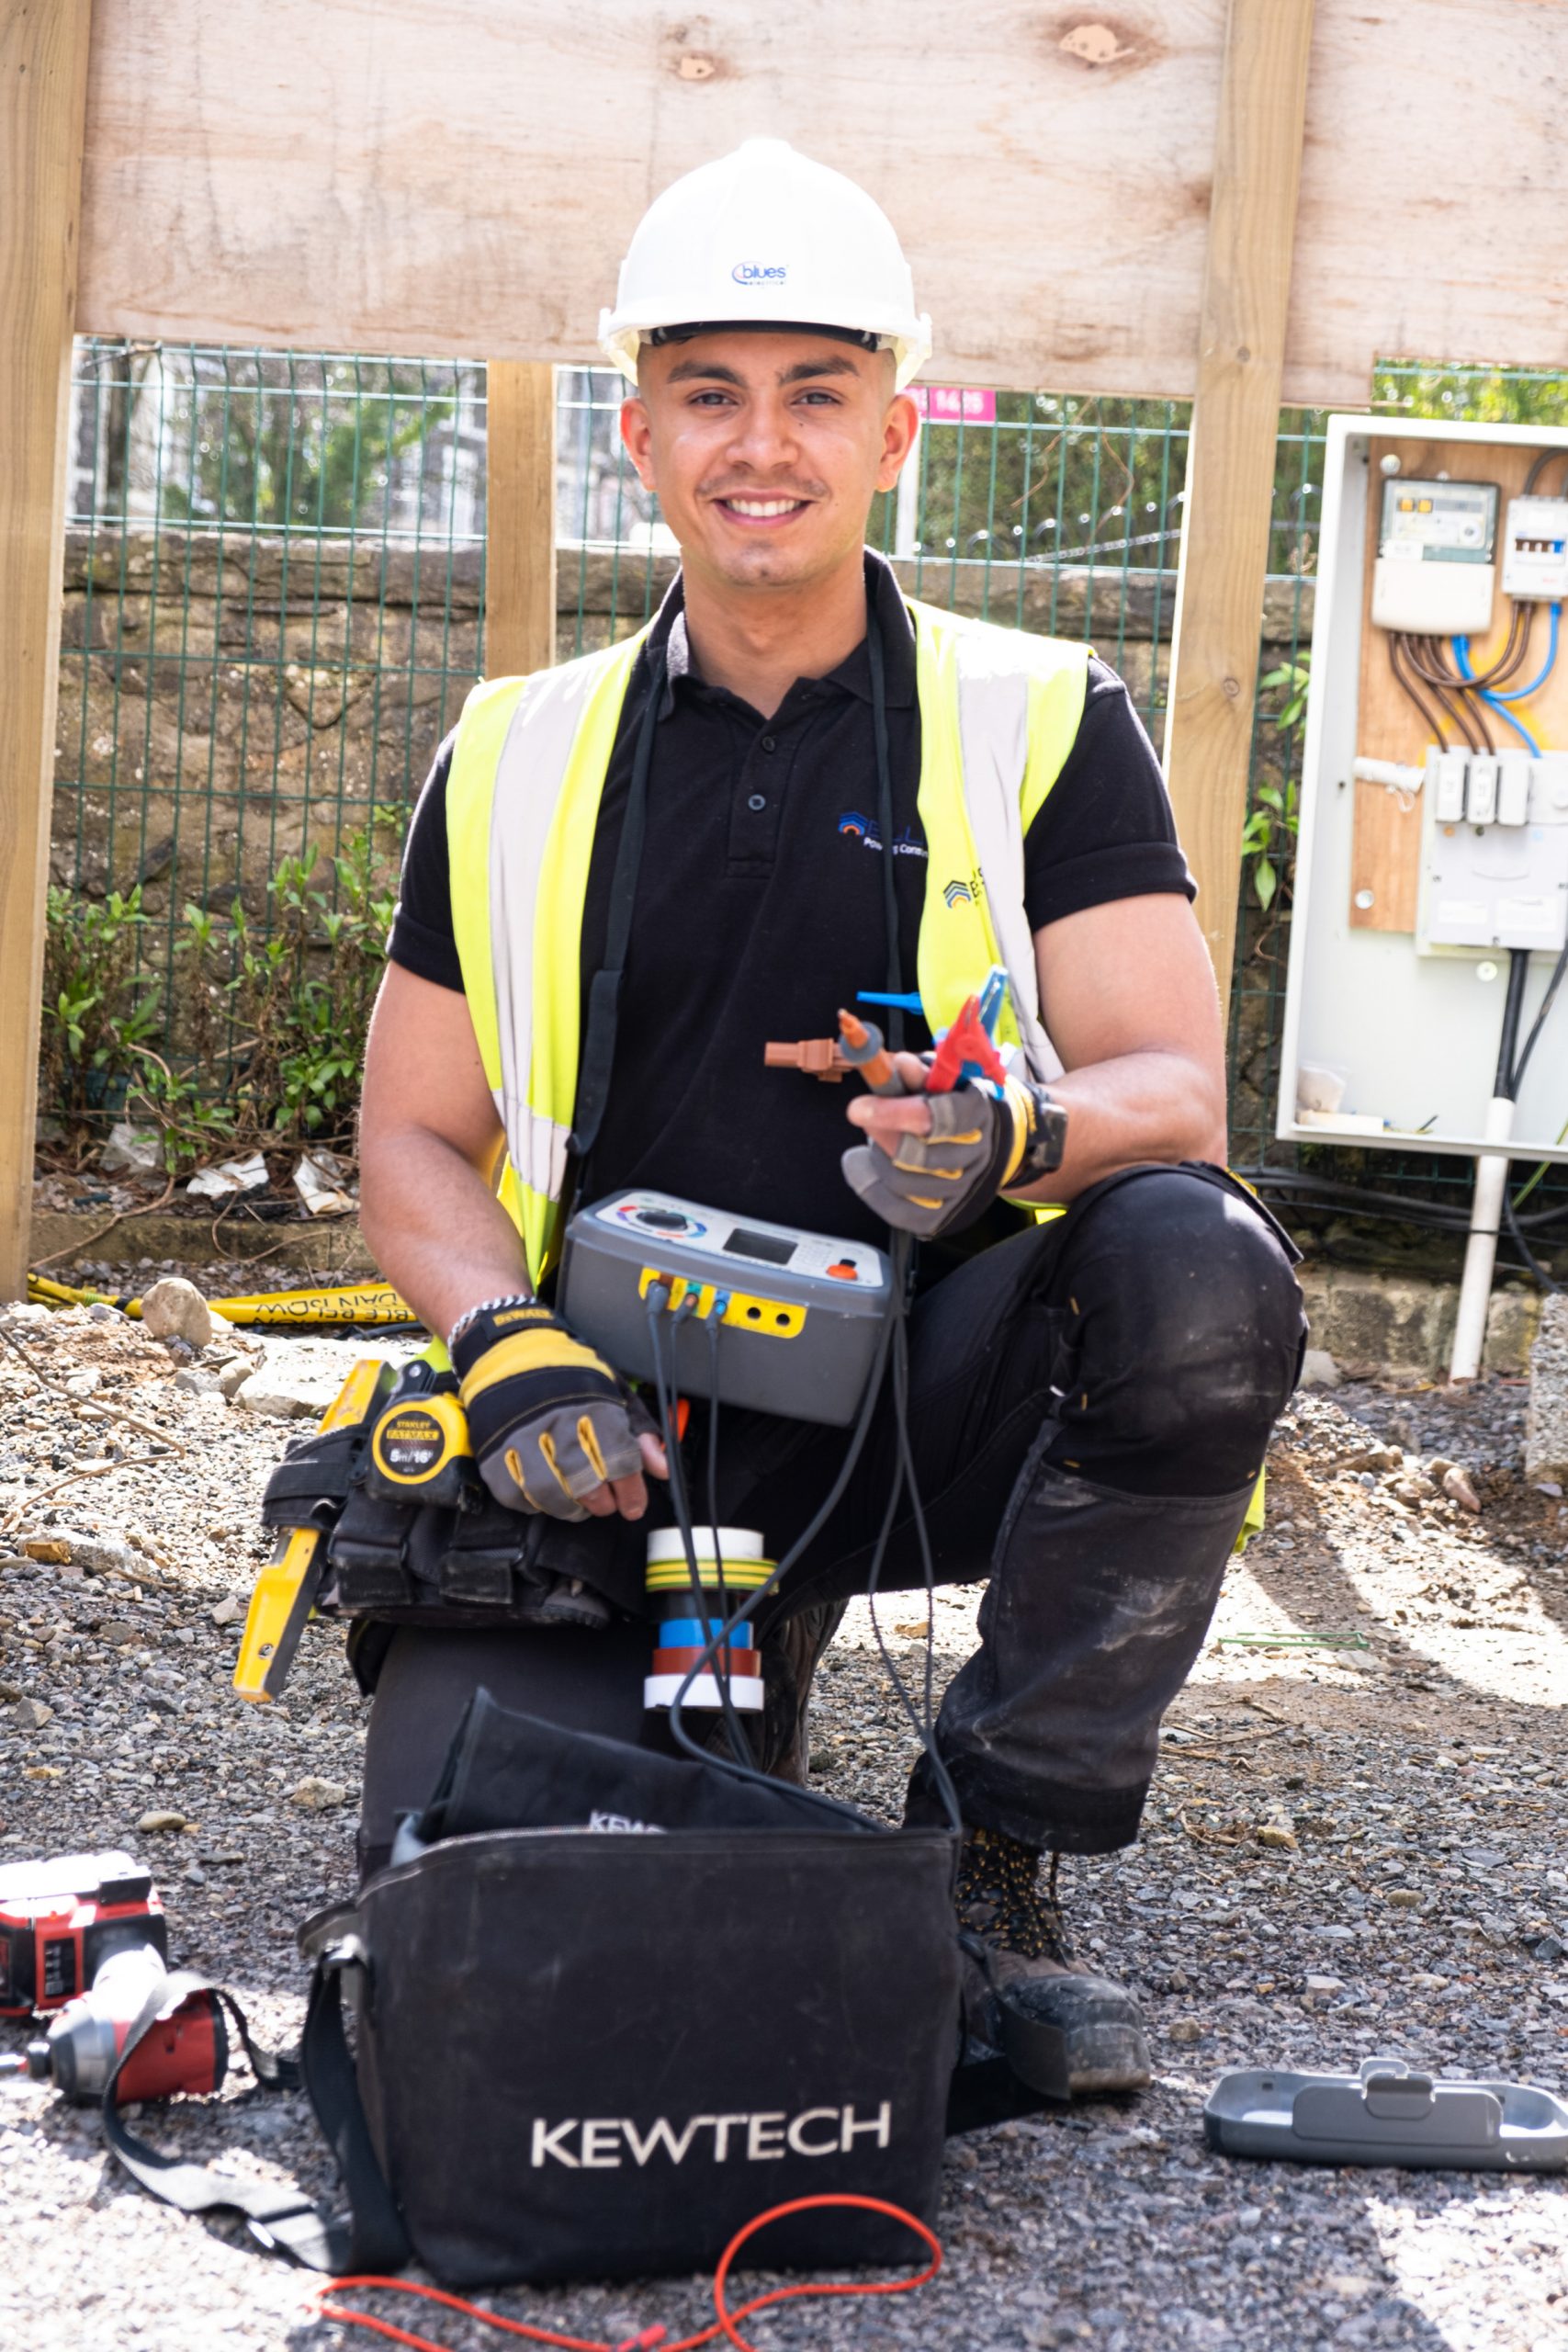 APPRENTICE FROM CARDIFF IS THE BEST IN THE NATION! @Screwfix